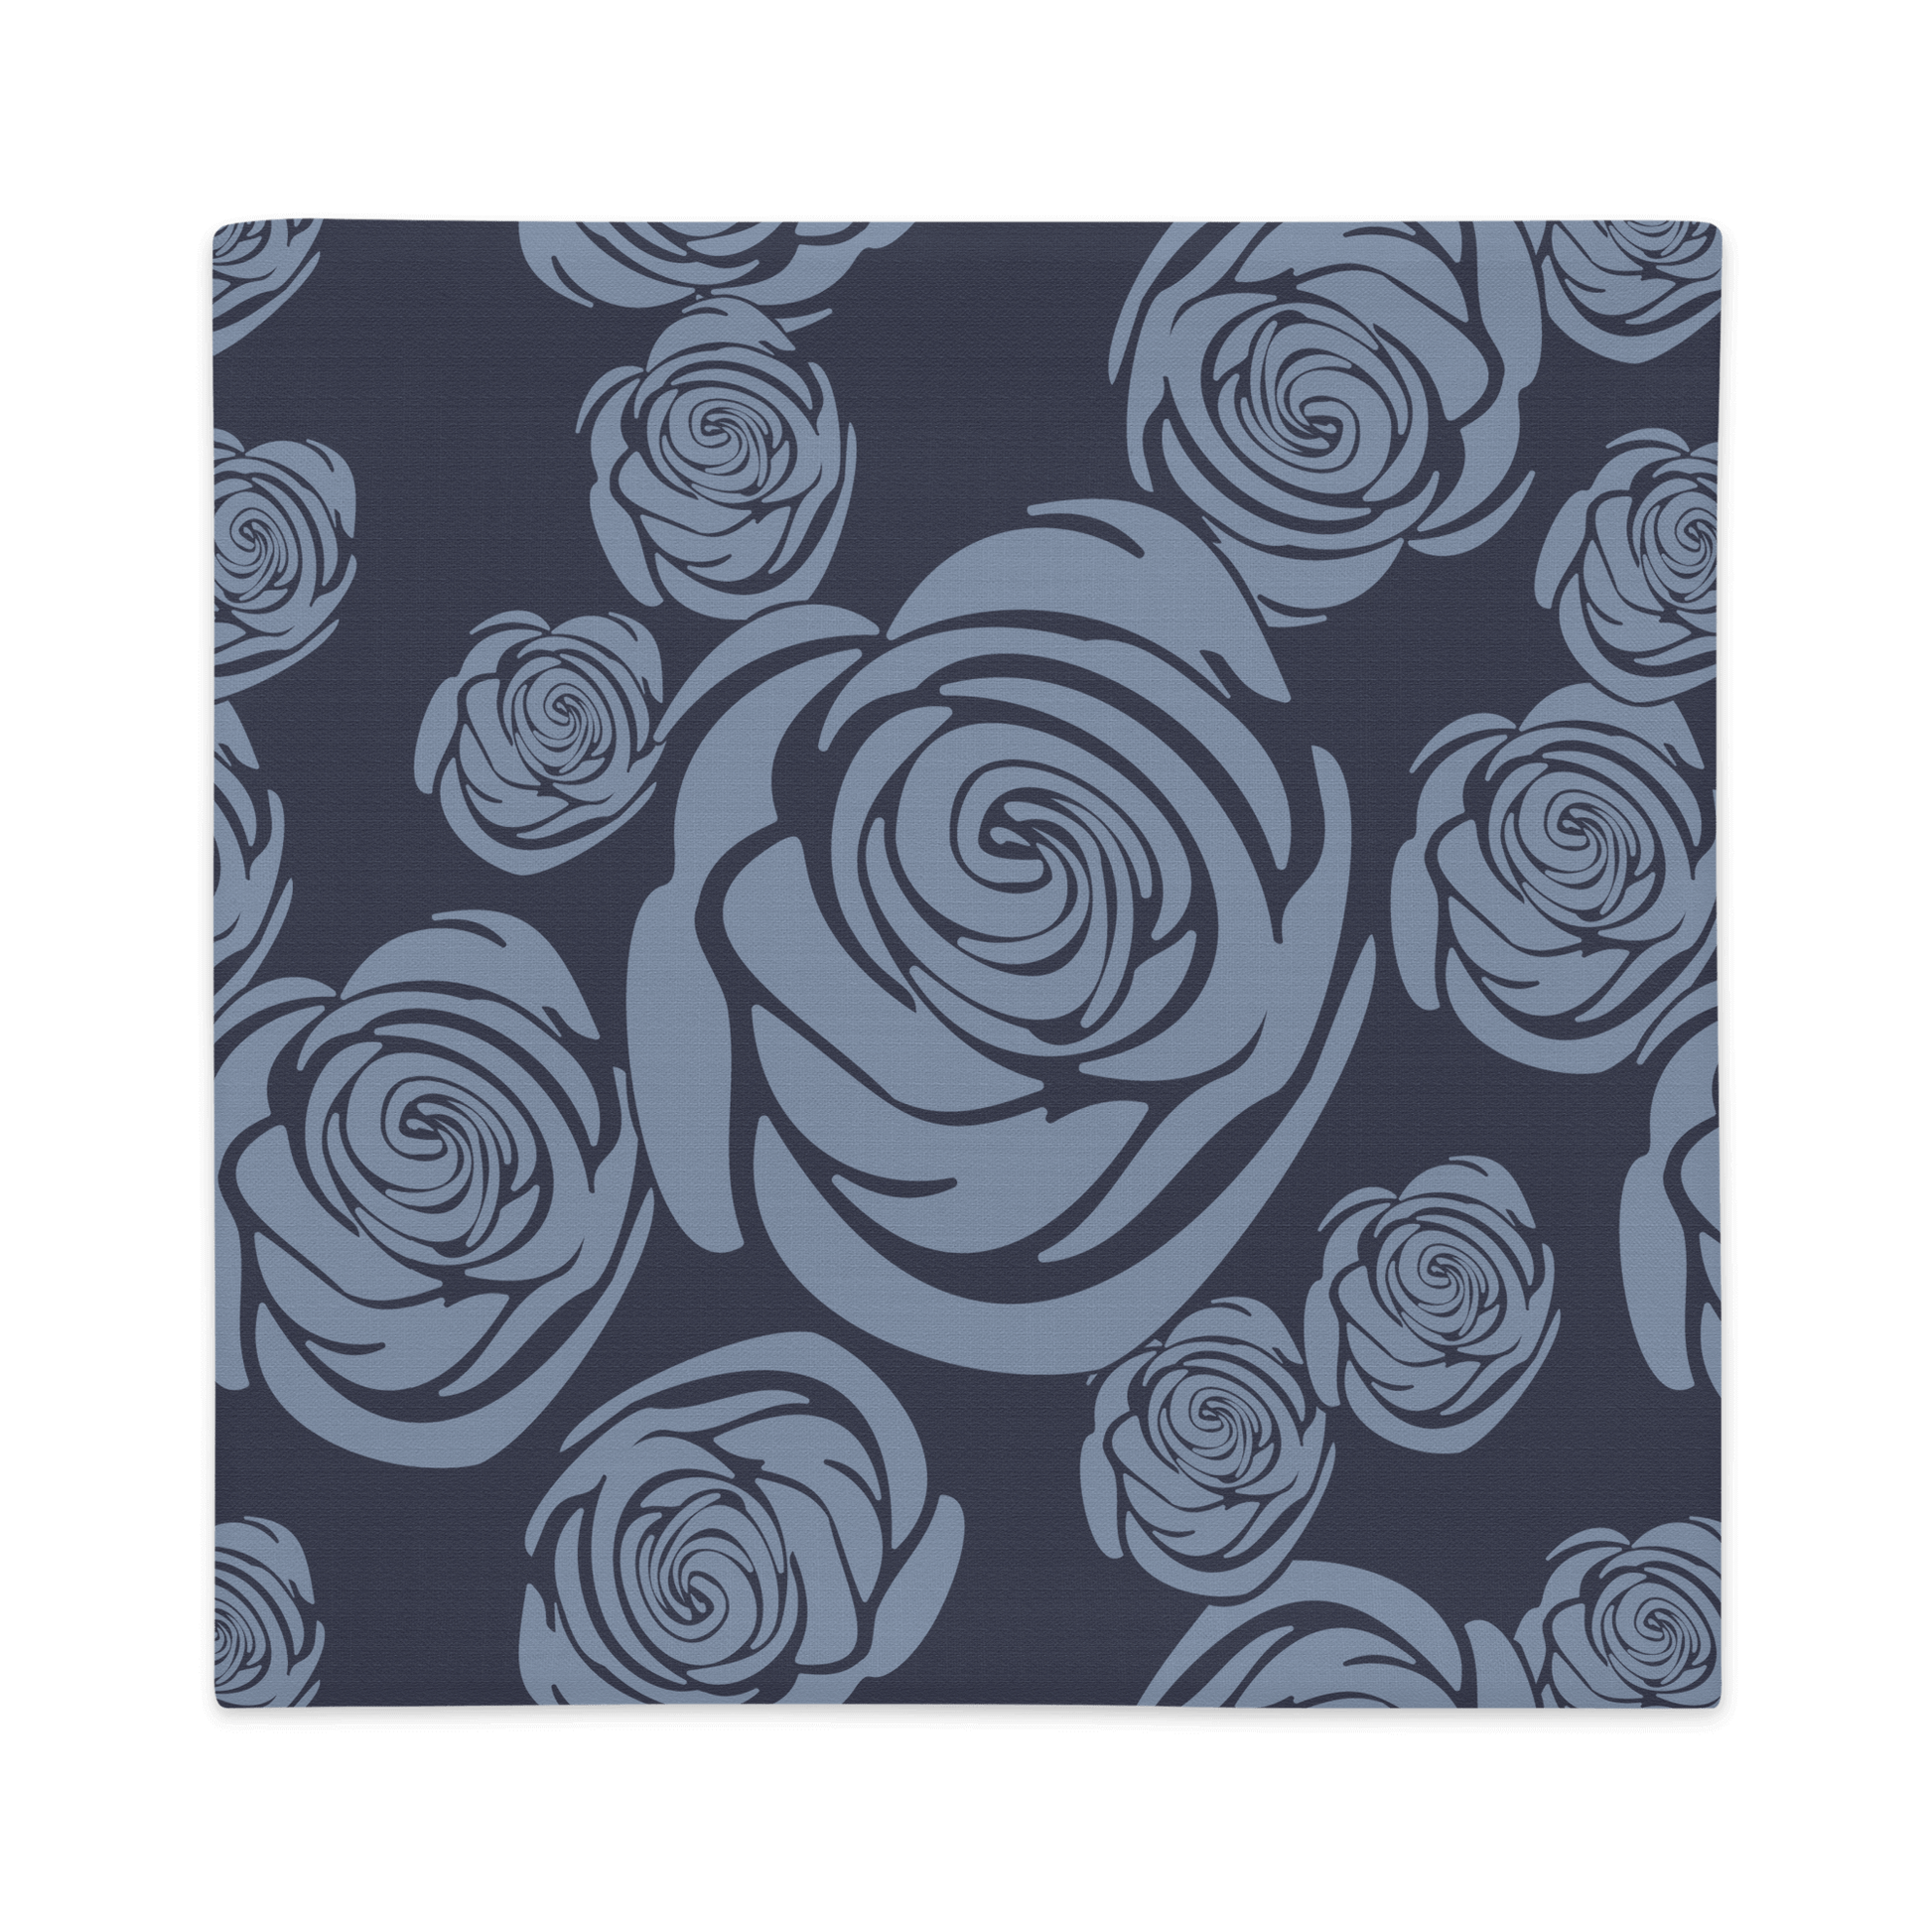 Rosa Rugosa Pillow Cover, Rain Washed front view